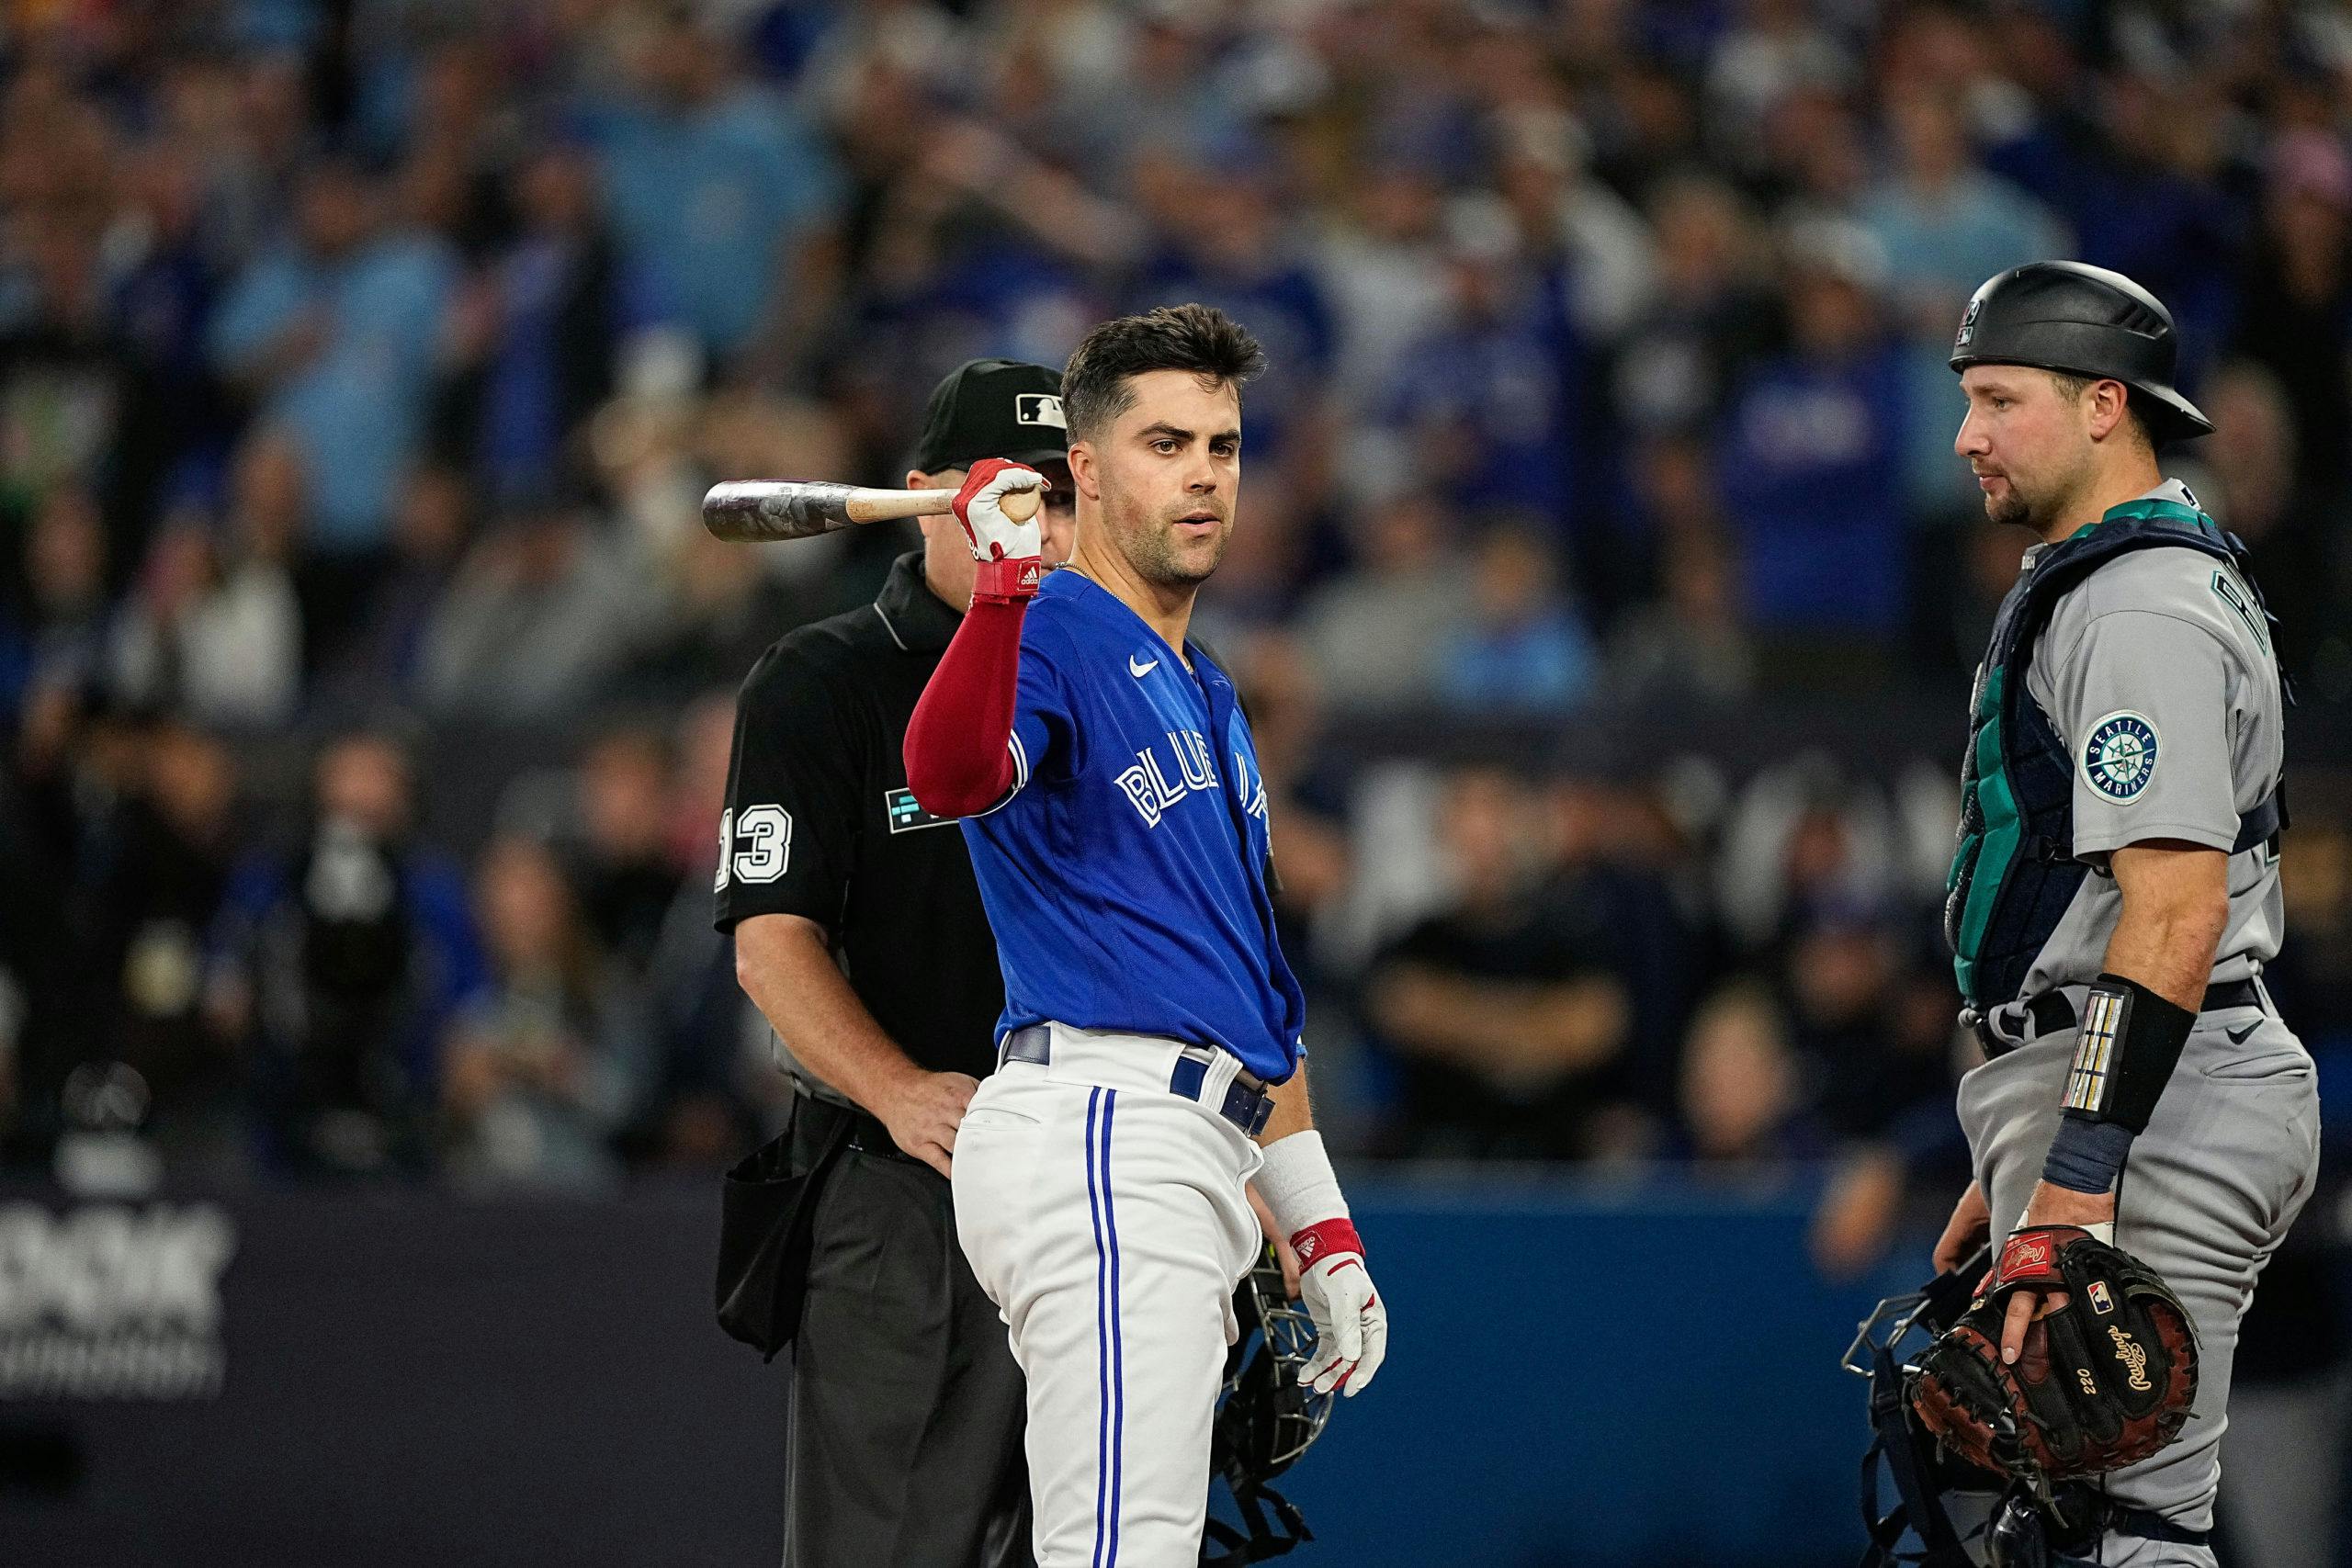 Revisiting the Whit Merrifield trade - BlueJaysNation